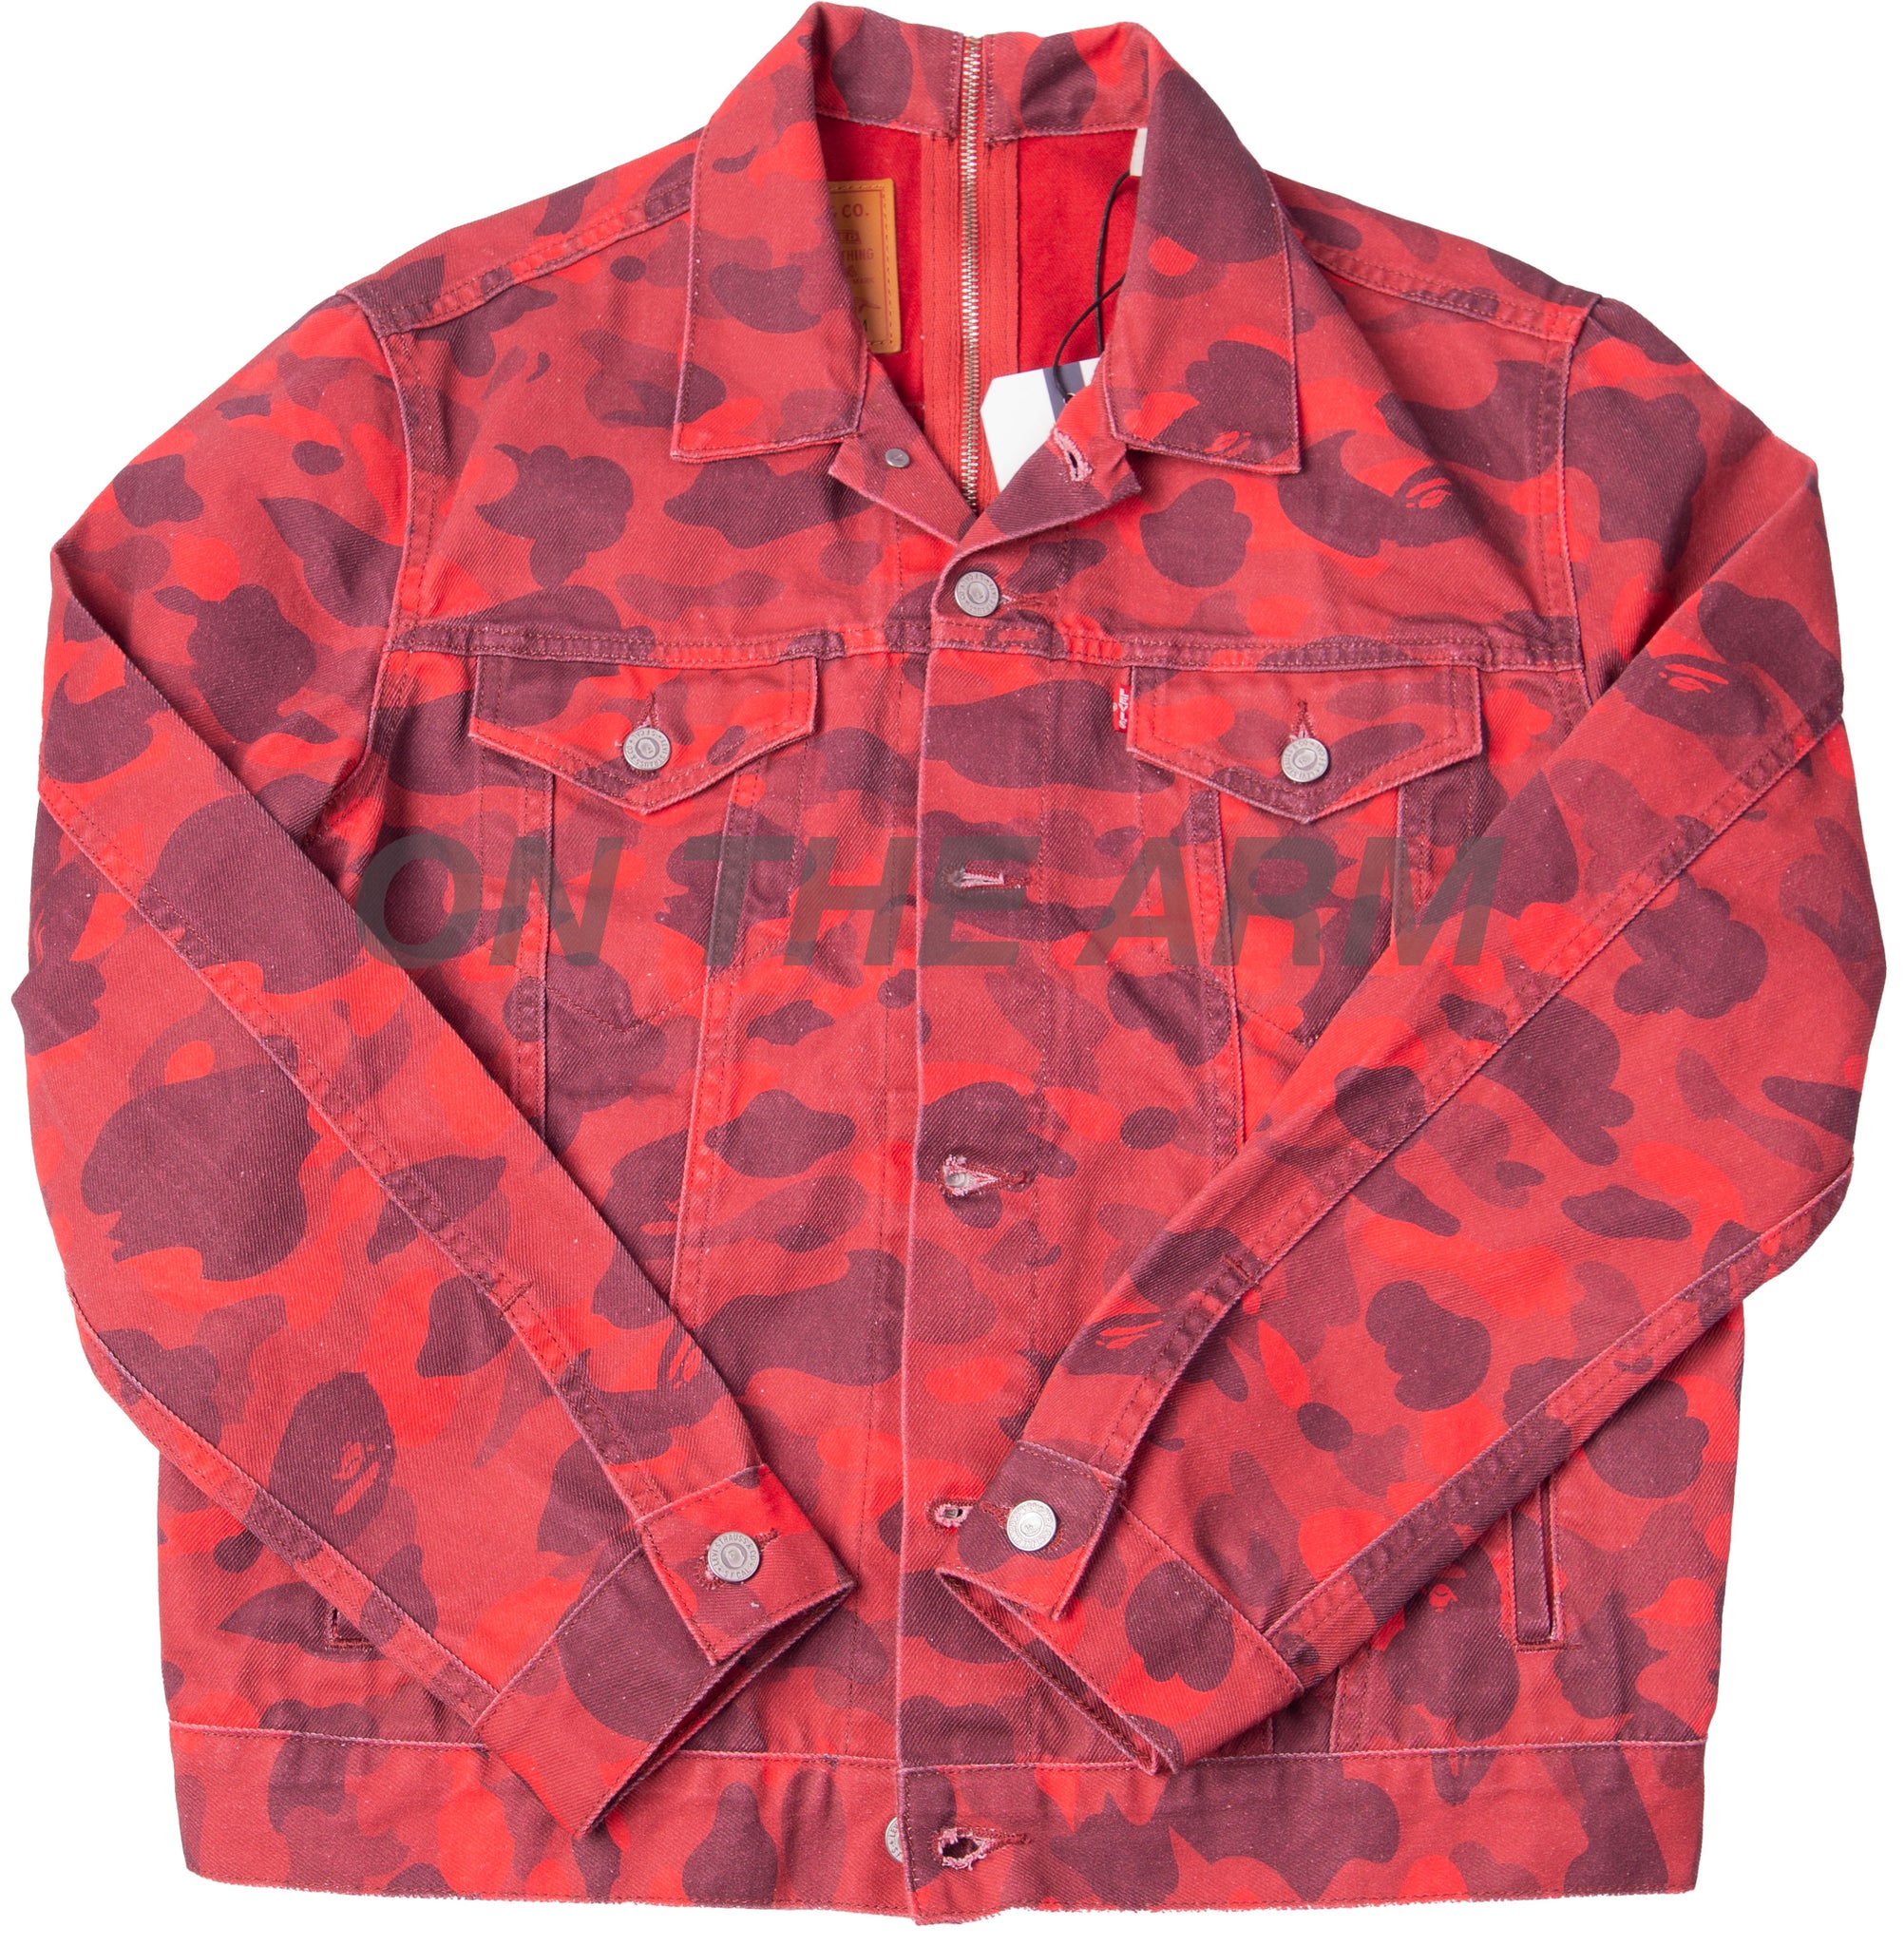 Bape Red Levi's Color Camo Trucker Jacket (Europe Exclusive) – On The Arm